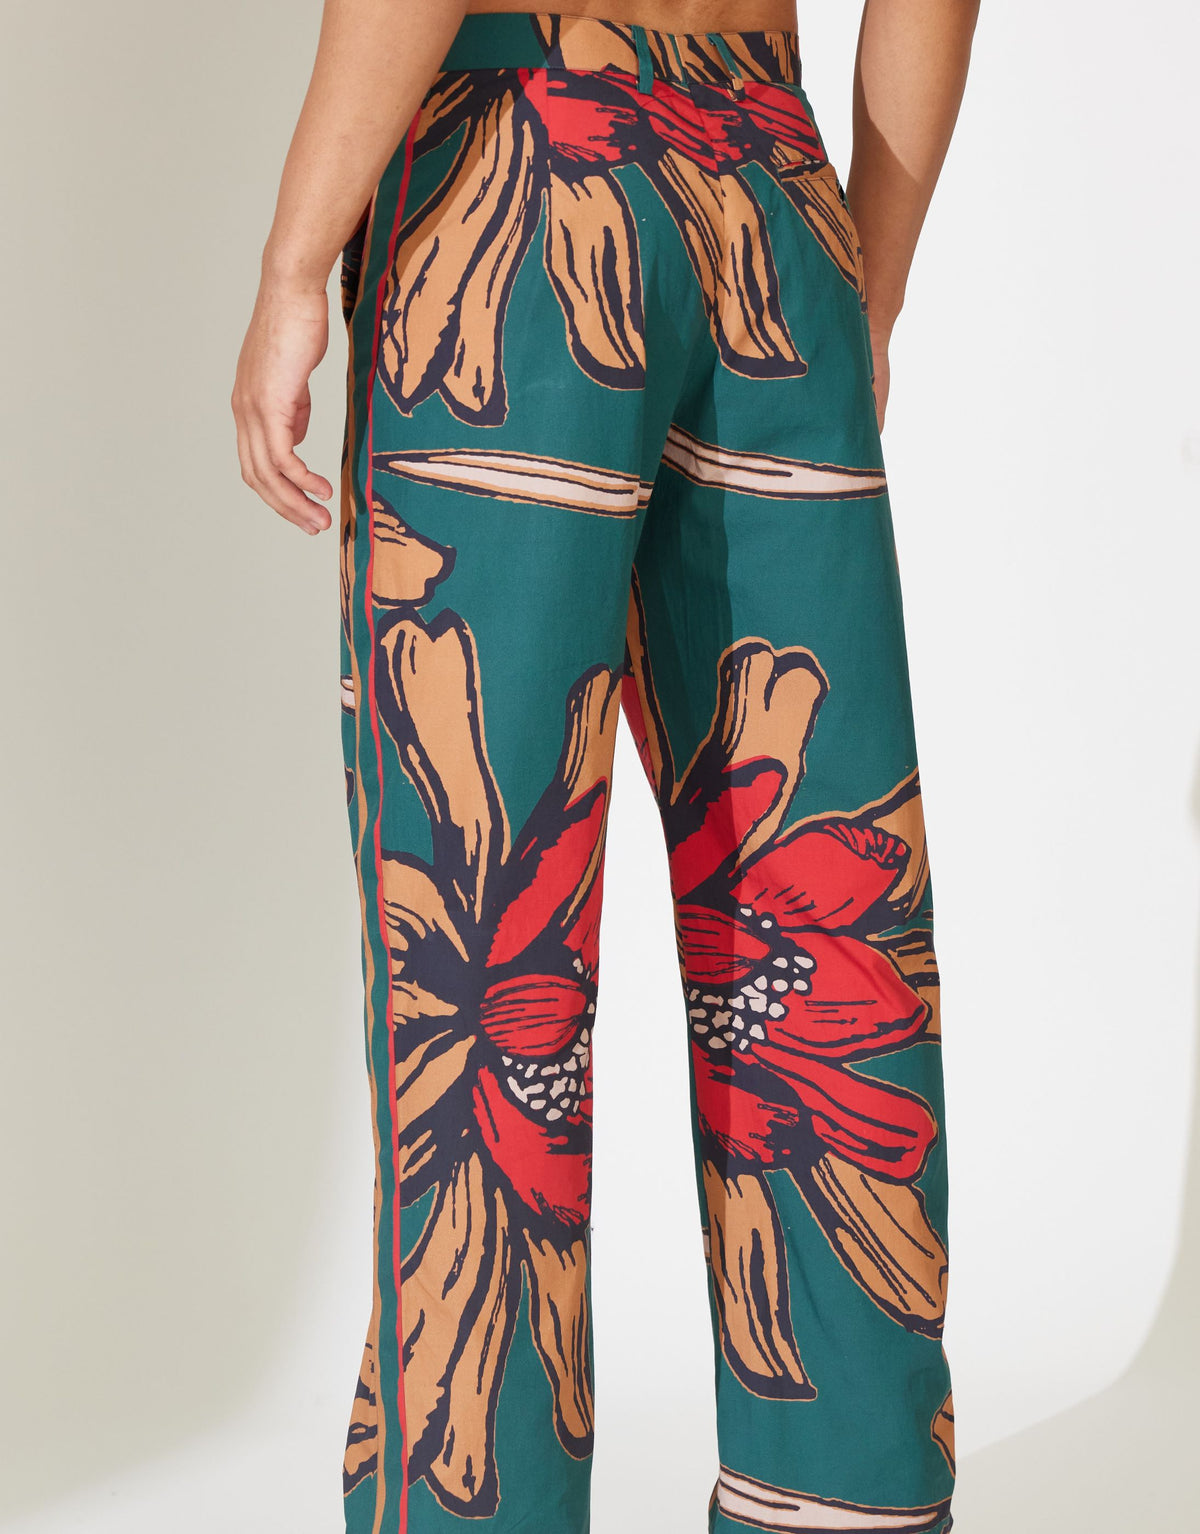 GREEN, BEIGE AND RED FLORAL PANTS